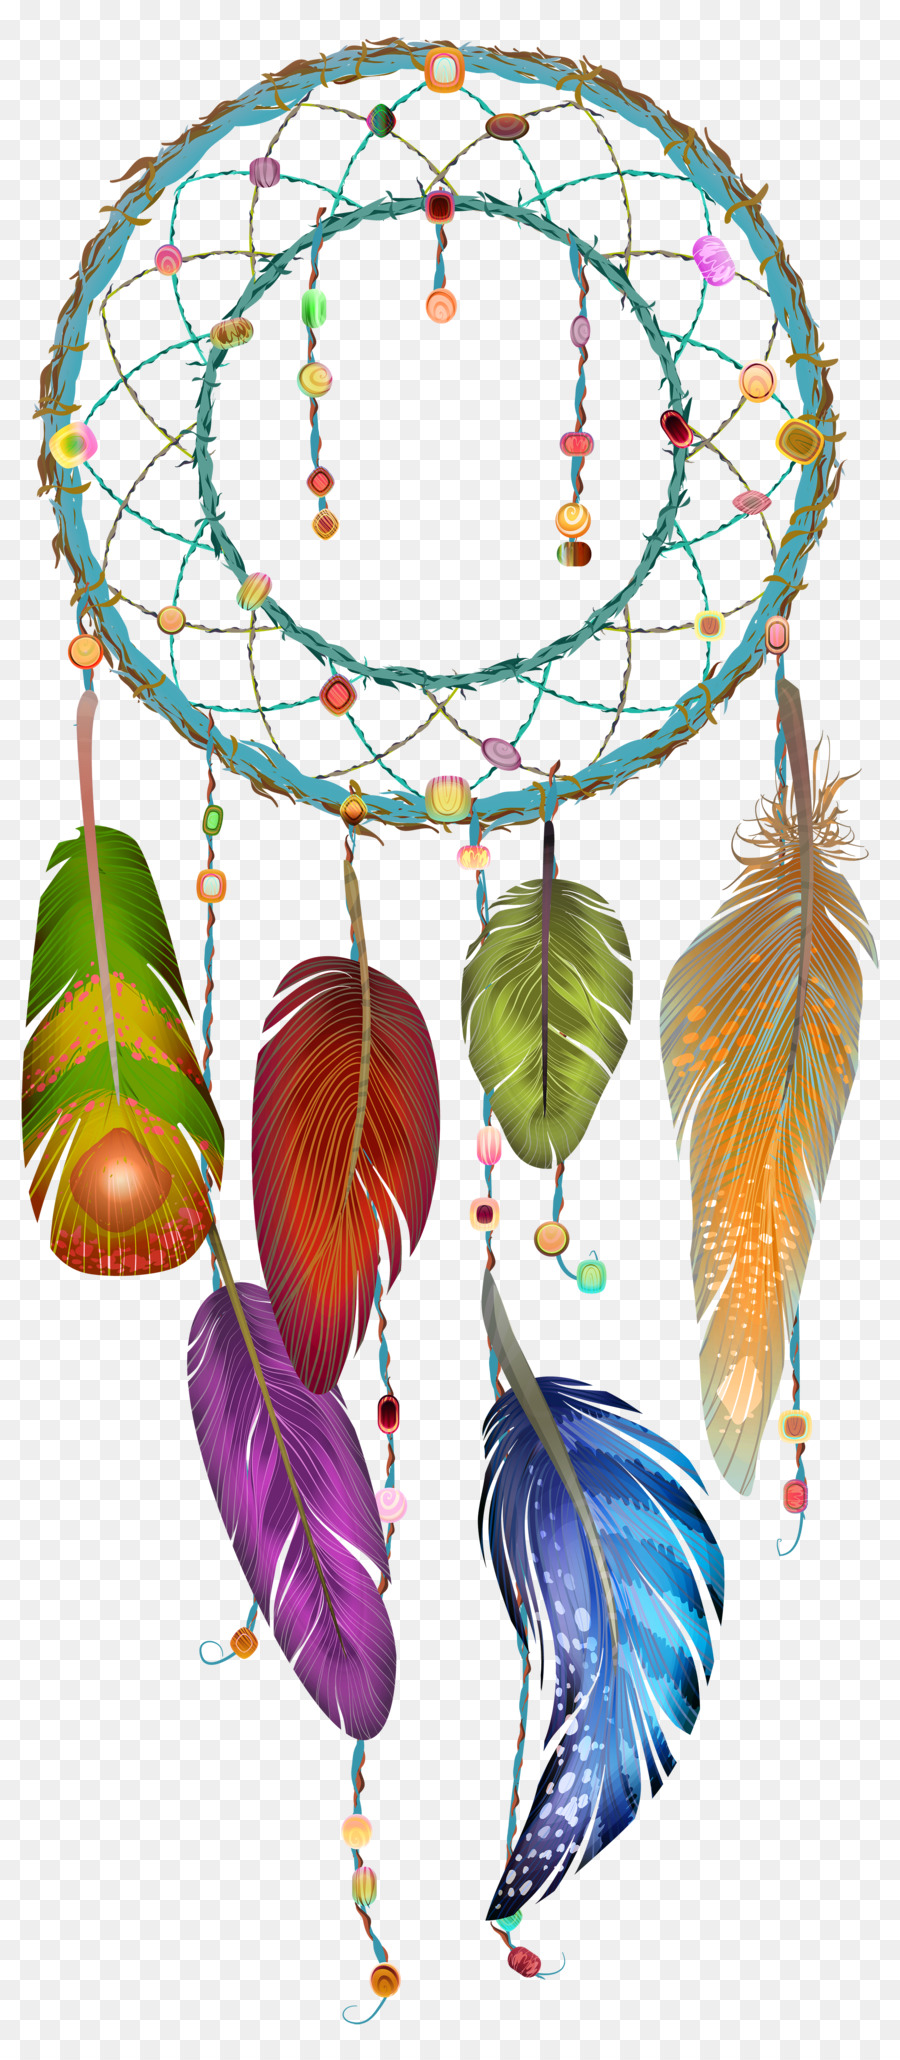 Dreamcatcher Drawing Indigenous peoples of the Americas - Dream png download - 2635*6000 - Free Transparent Dreamcatcher png Download.